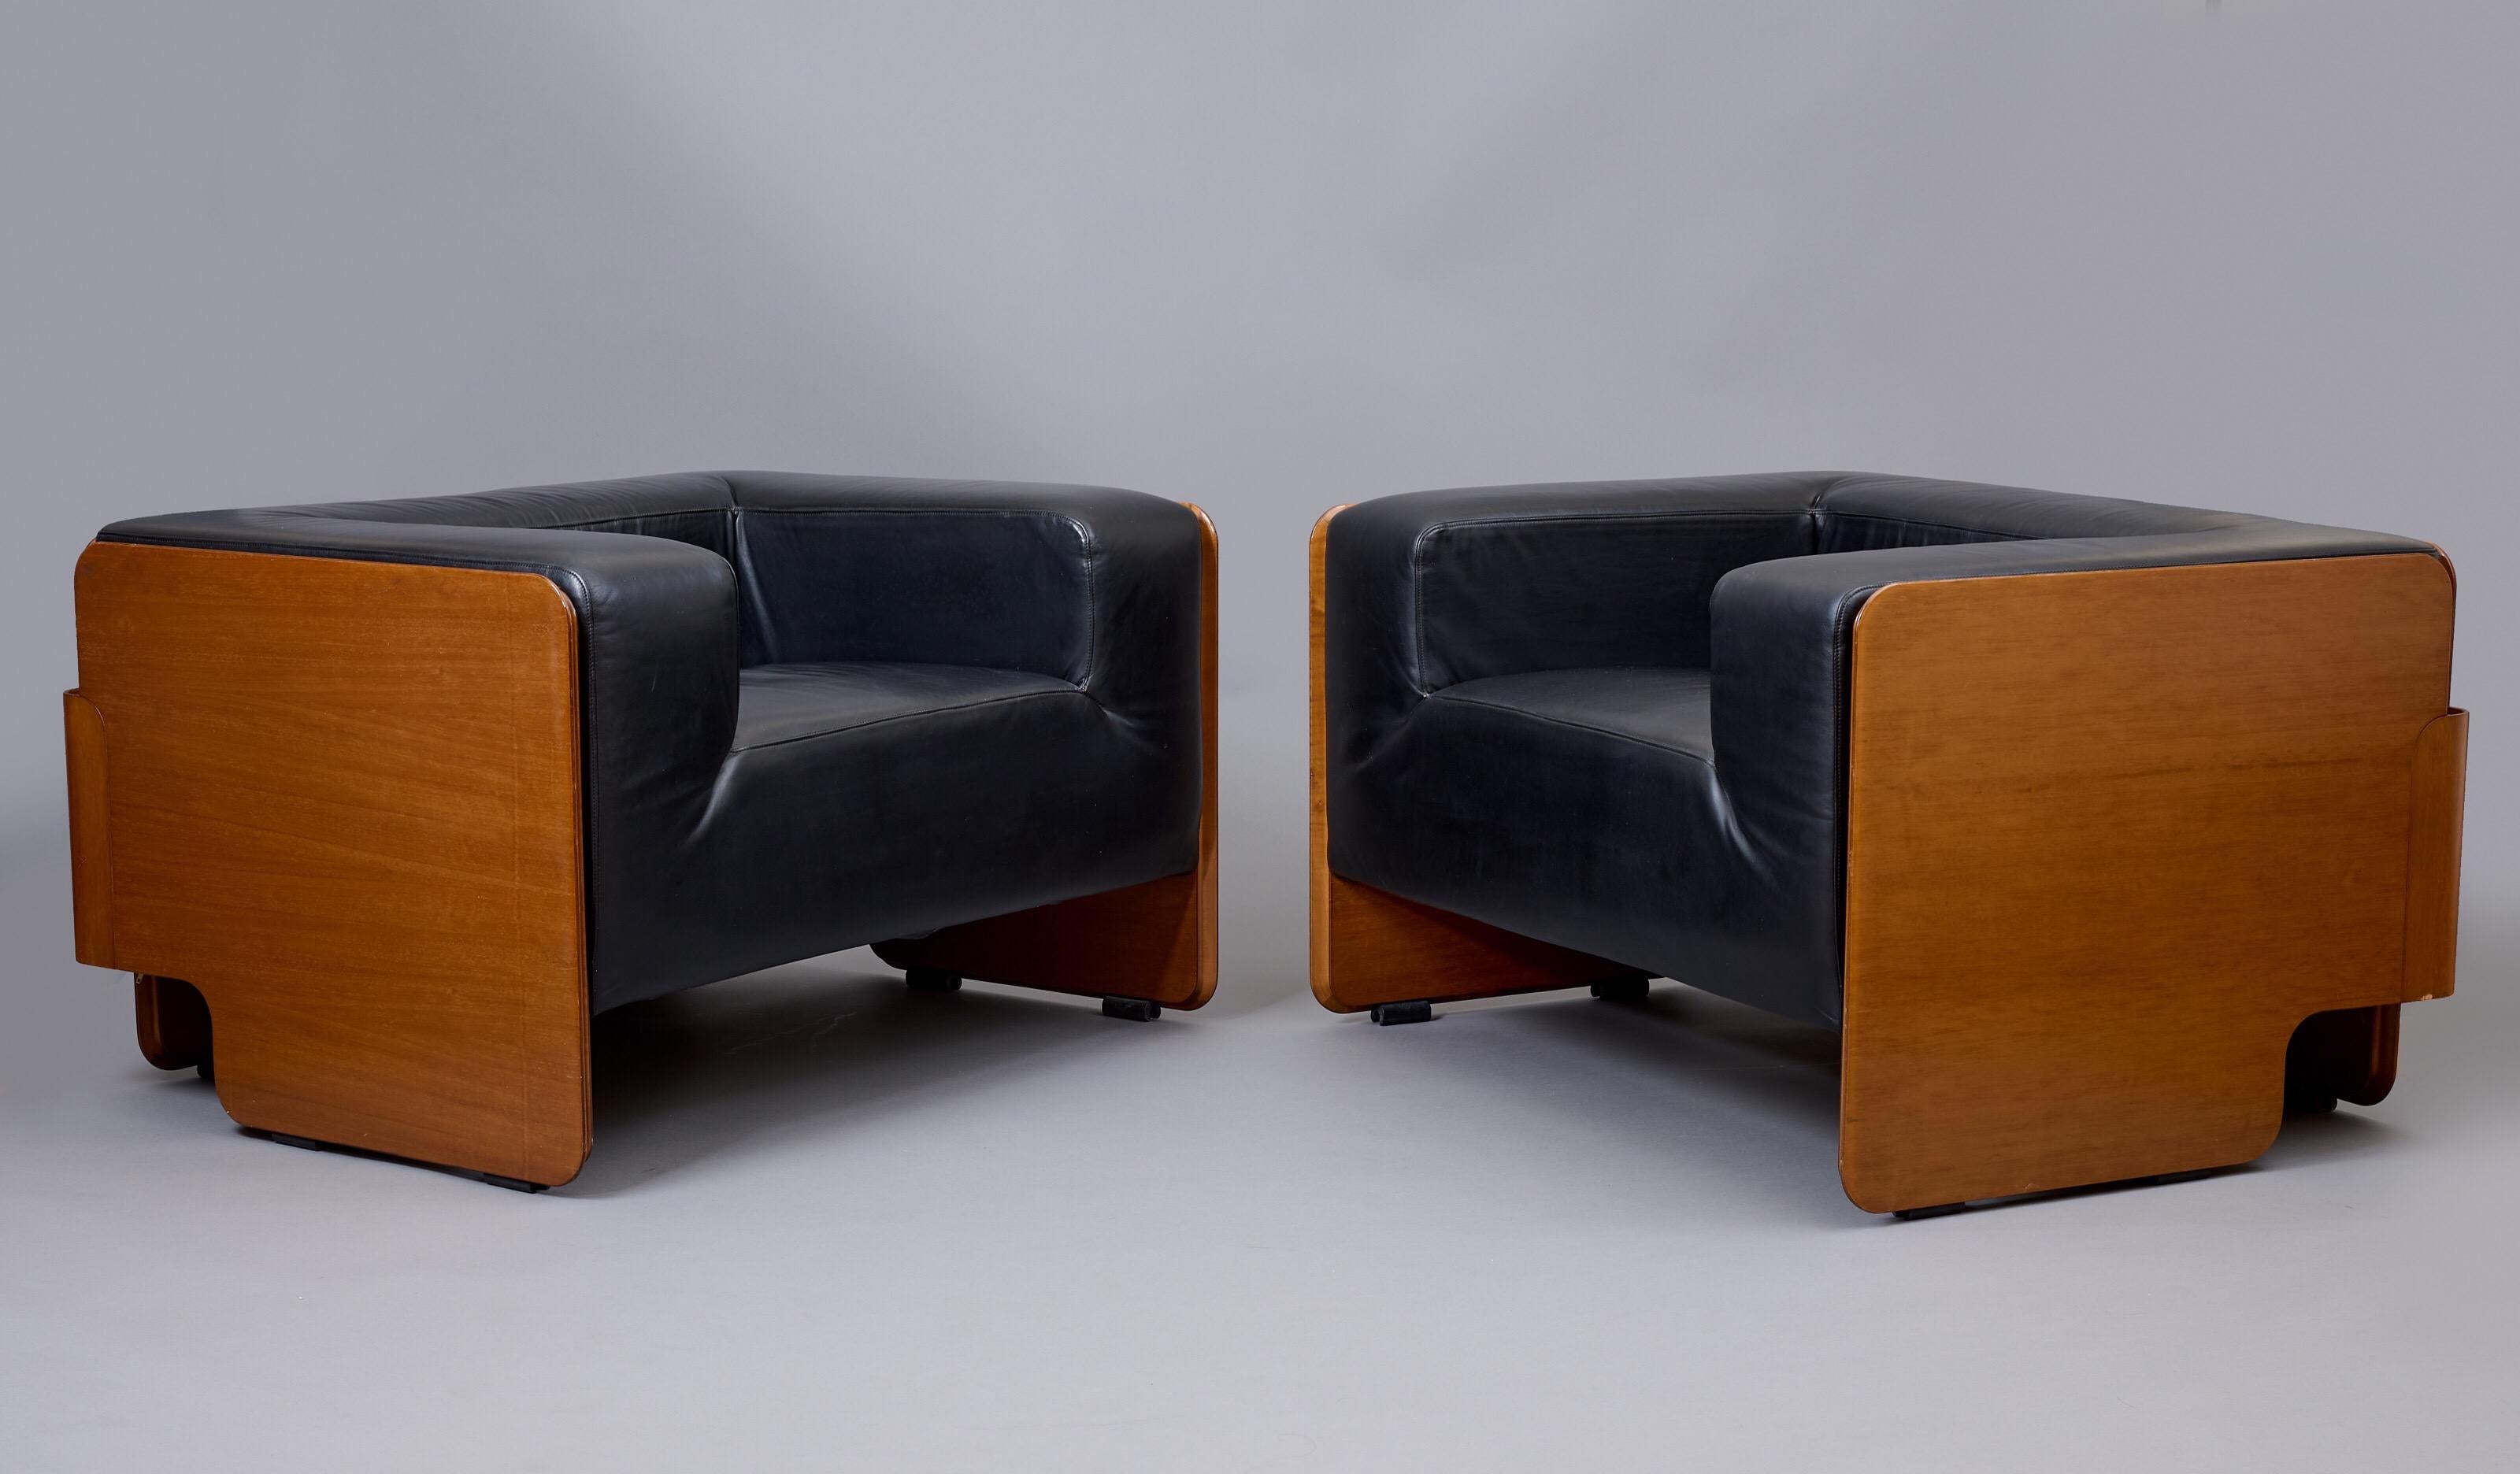 Italy, 1970s

A massive, voluptuously comfortable pair of geometric club chairs in walnut and black leather. A three-paneled rectangular armature in walnut veneer, with rounded edges and fluid cut-outs along the sides and back, wraps around a deep,